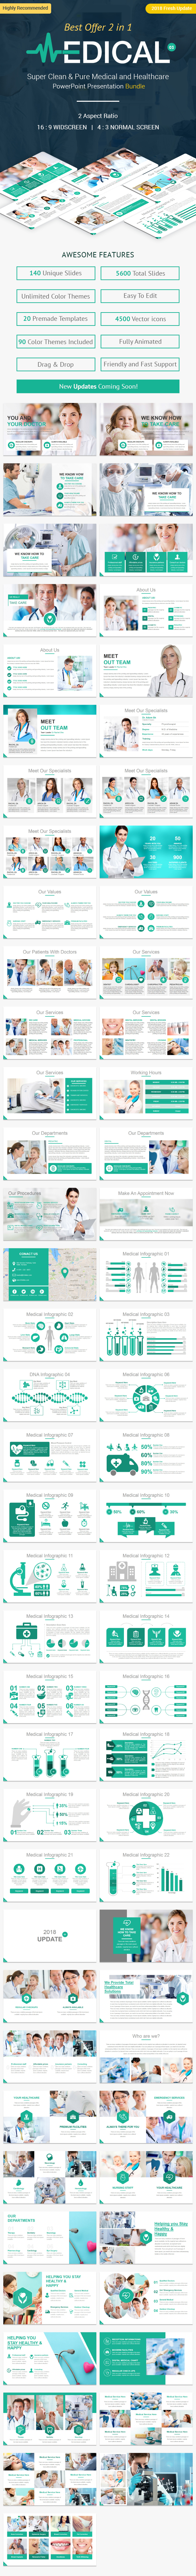 2 In 1 Medical and Healthcare PowerPoint Presentation Bundle